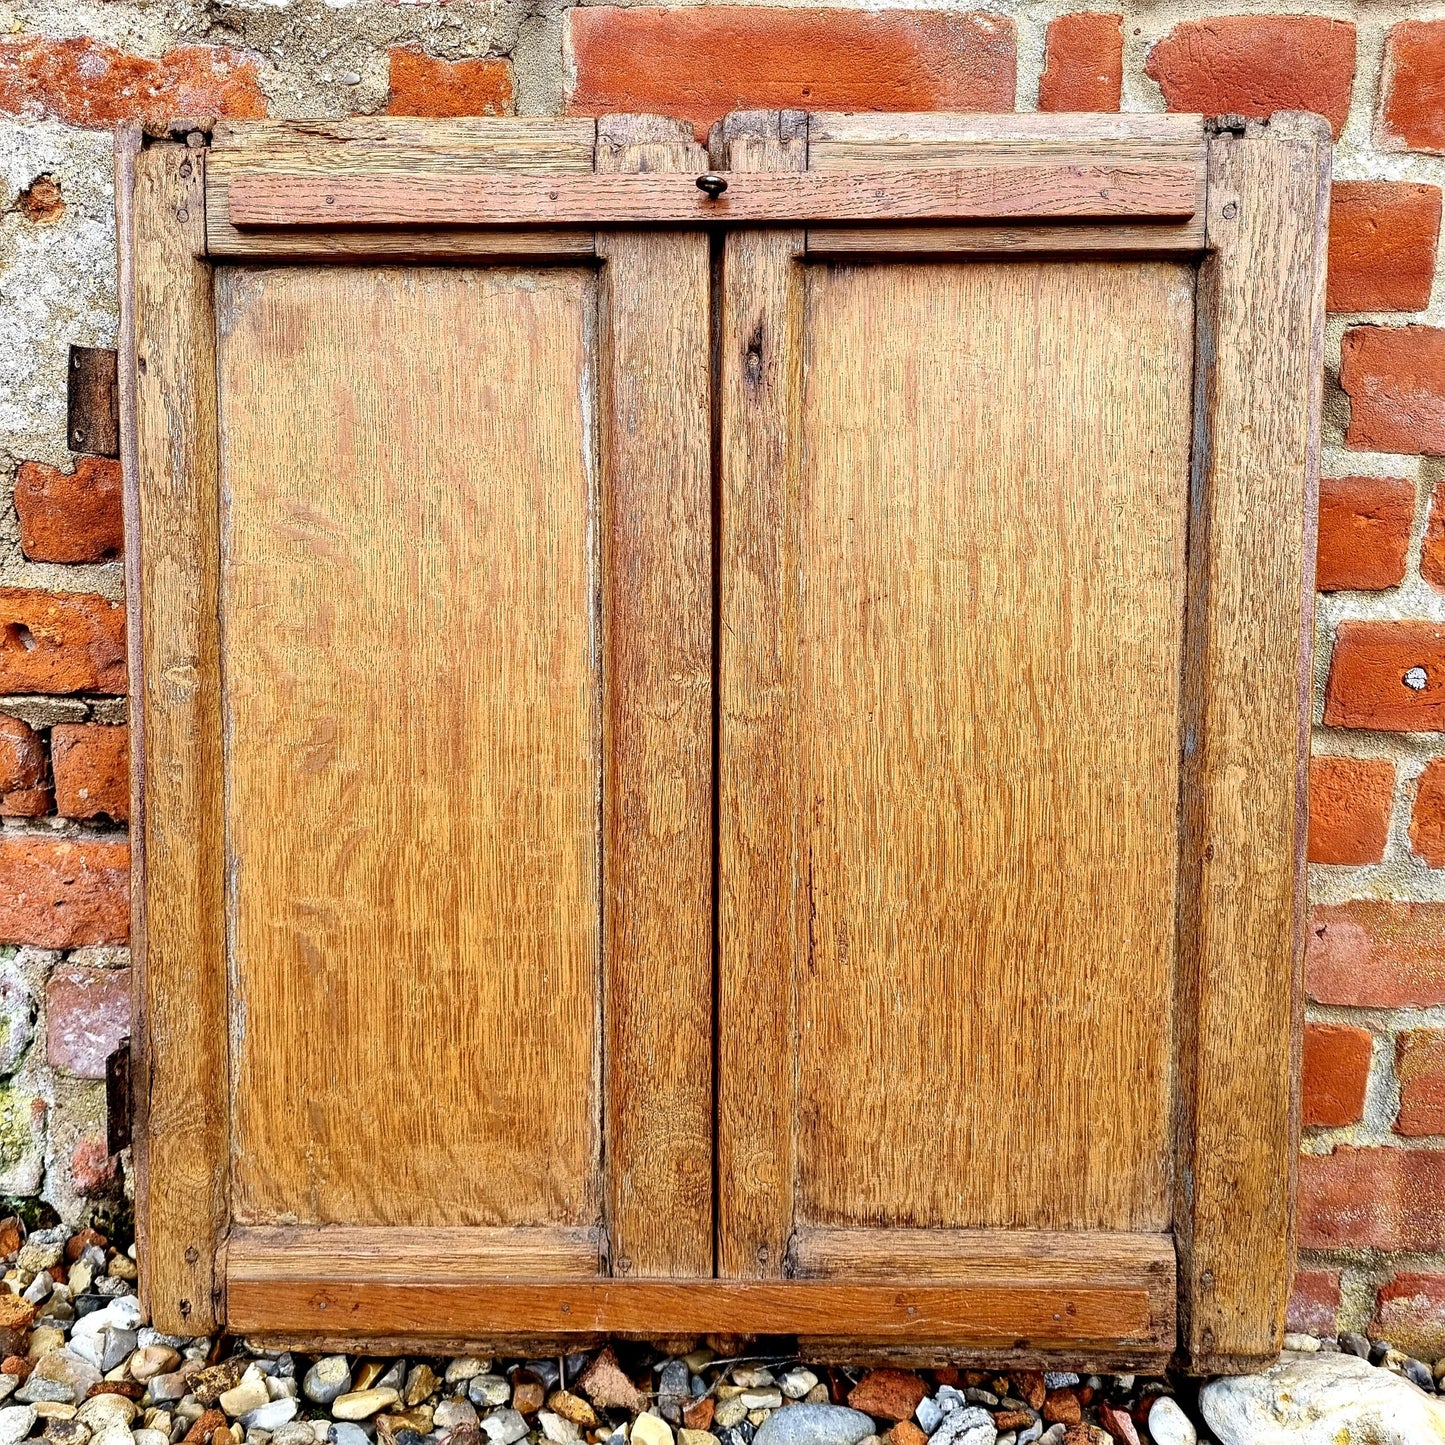 Pair of Early 16th Century Antique Carved Oak Window Shutters, Dated "1525" & Bearing the Initials "GC"